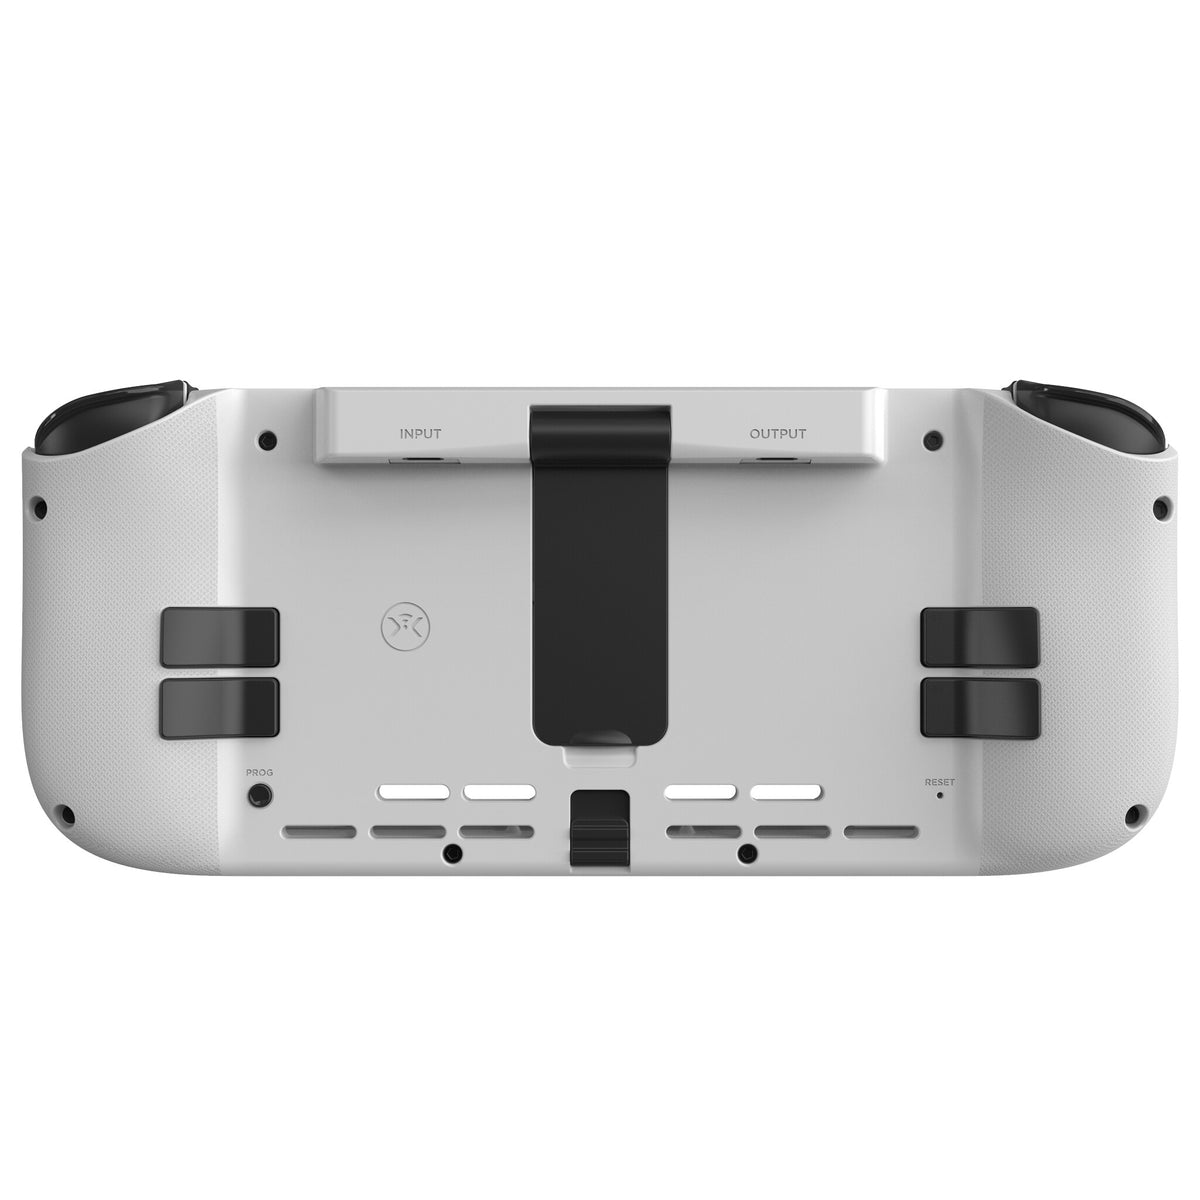 CRKD Nitro Deck for Nintendo Switch in White